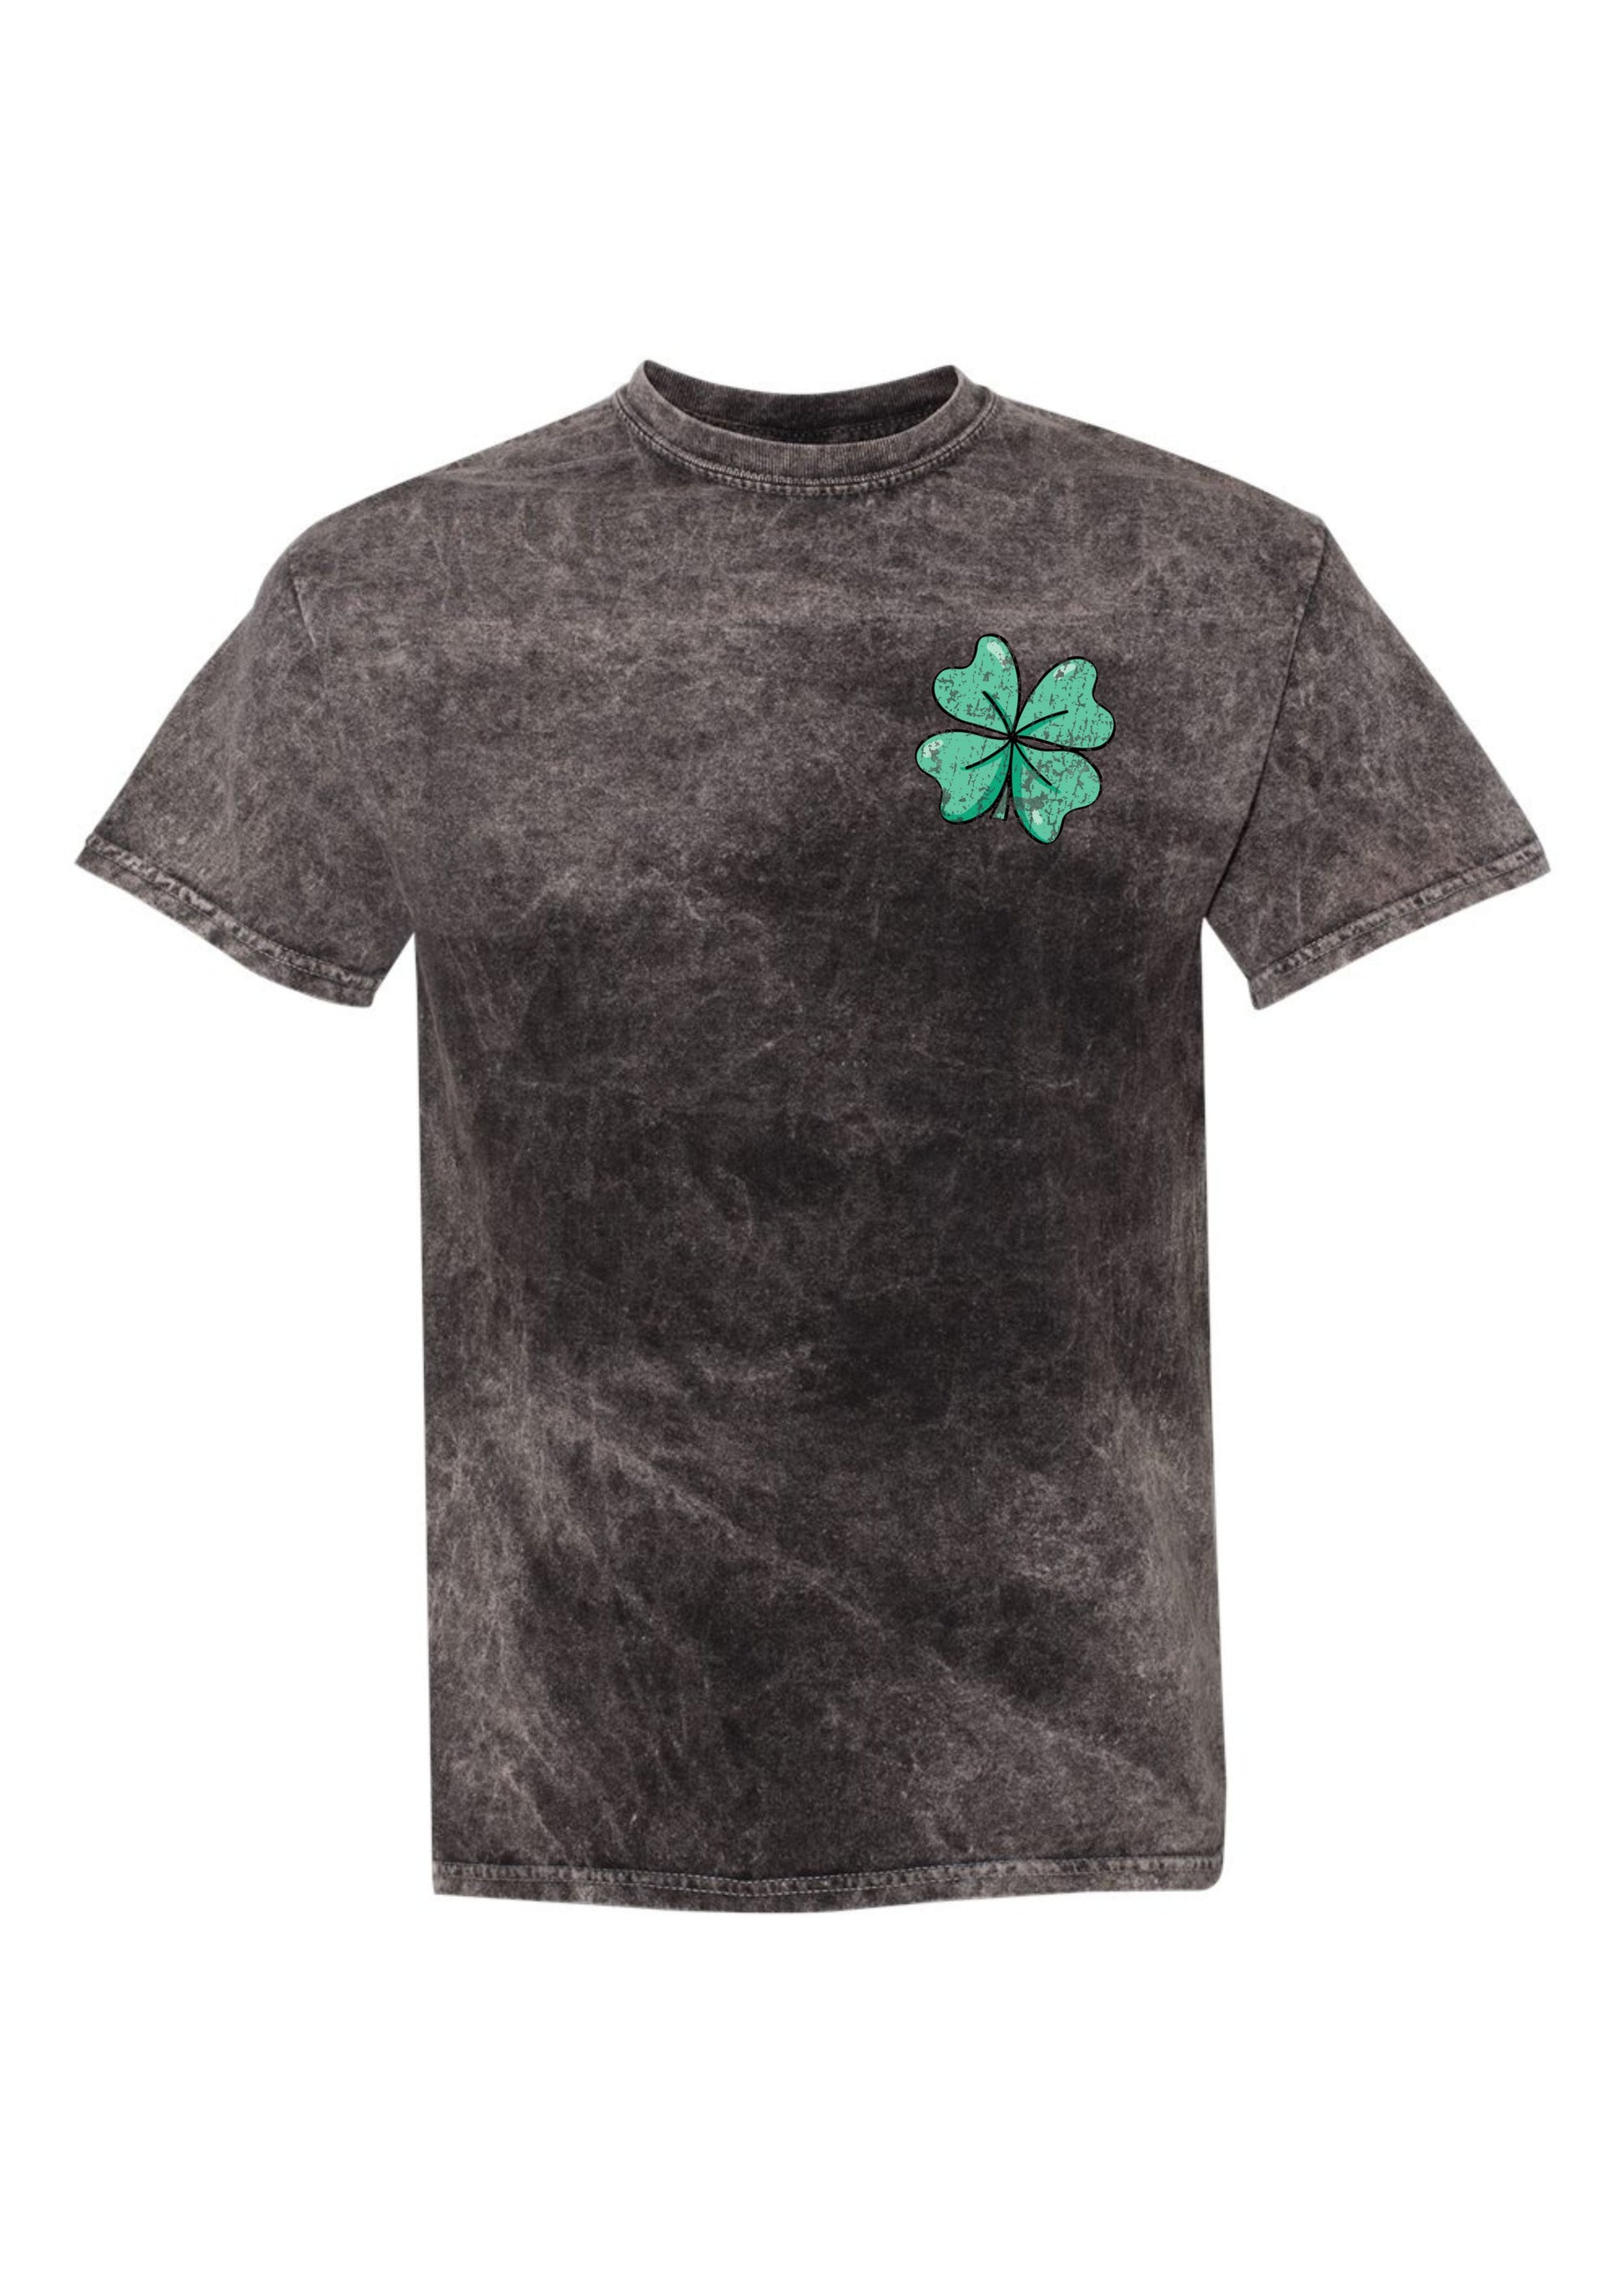 Lucky's Inn | Mineral Wash Tee | Adult-Sister Shirts-Sister Shirts, Cute & Custom Tees for Mama & Littles in Trussville, Alabama.